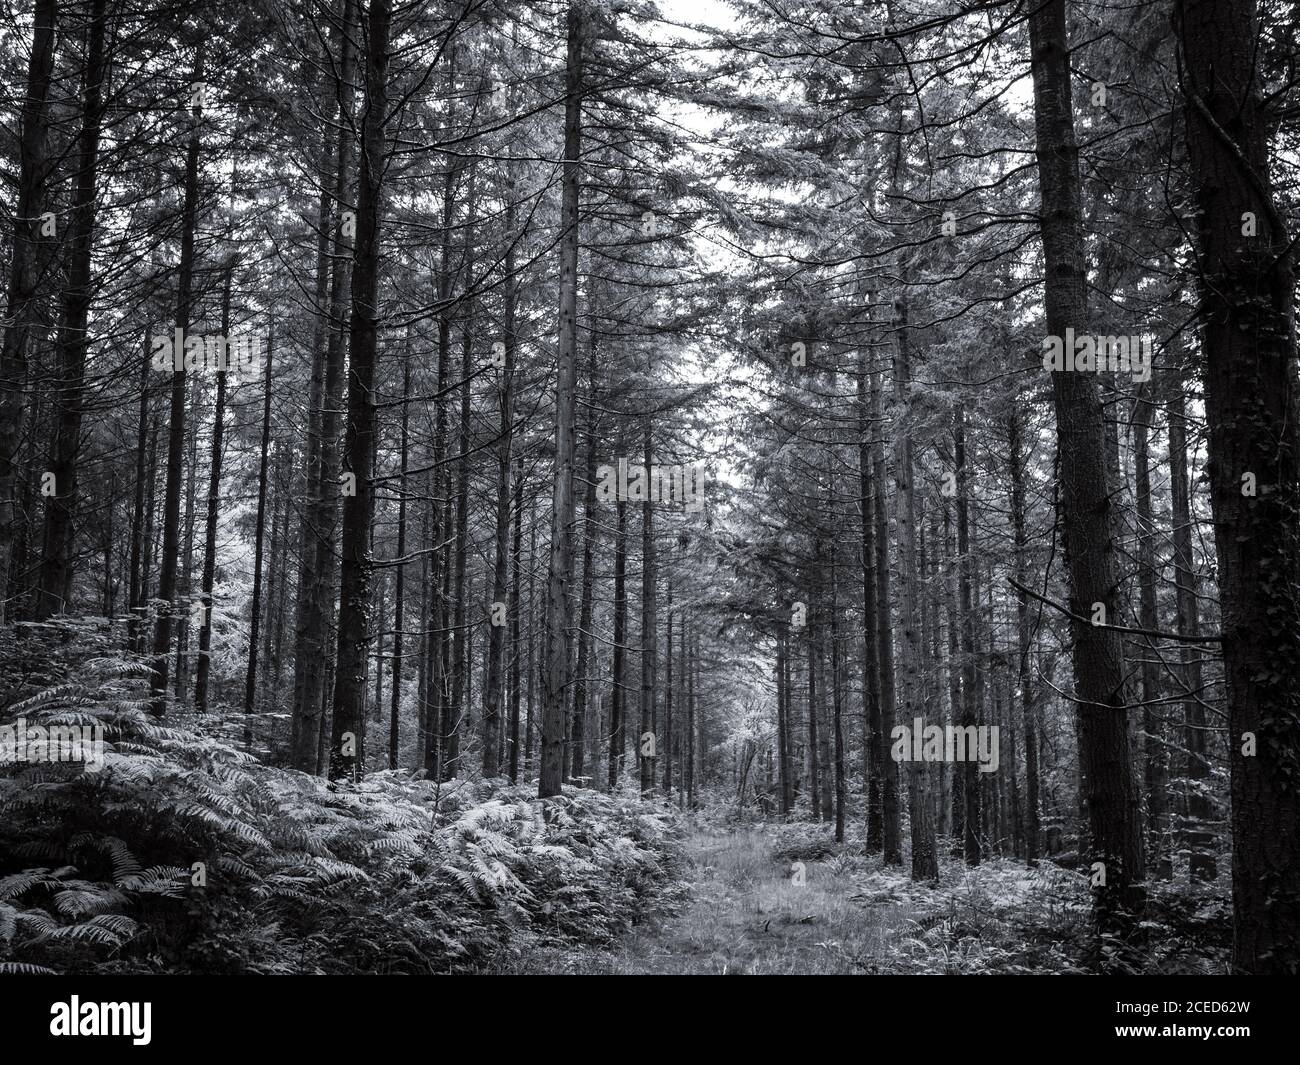 Monochrome image of a track through tall fir trees. Stock Photo